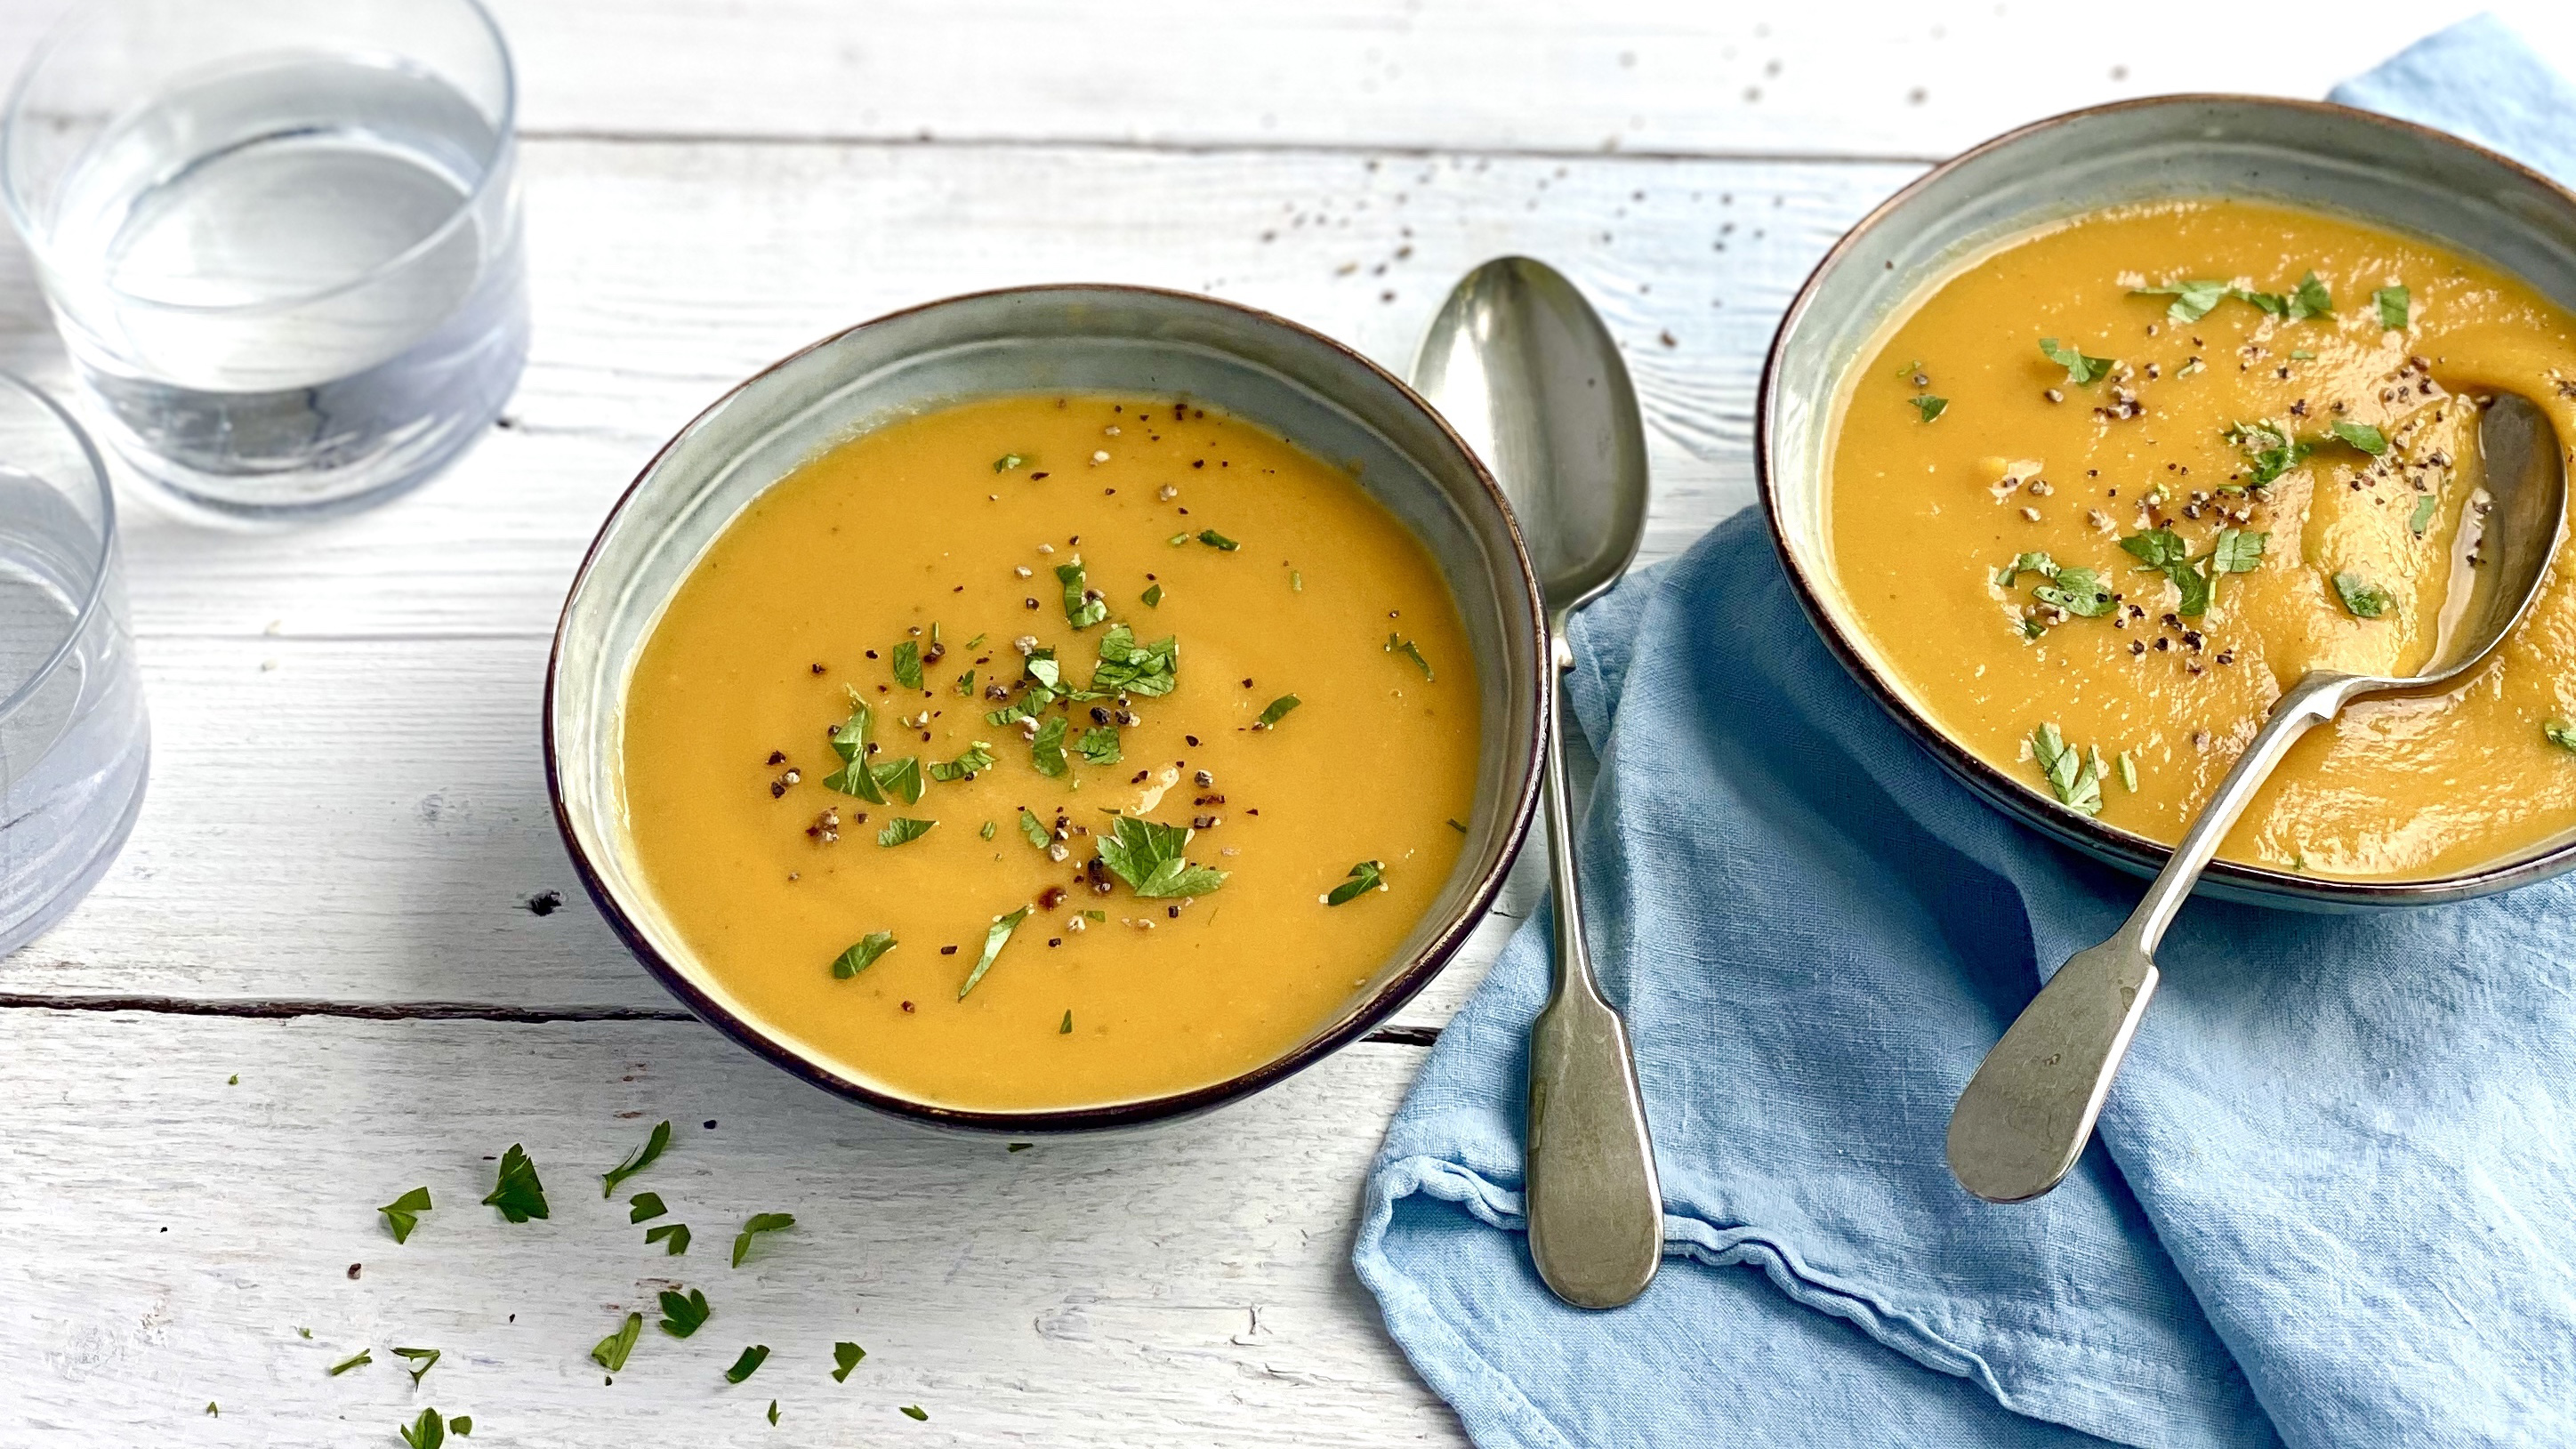 https://food-images.files.bbci.co.uk/food/recipes/root_vegetable_soup_14910_16x9.jpg